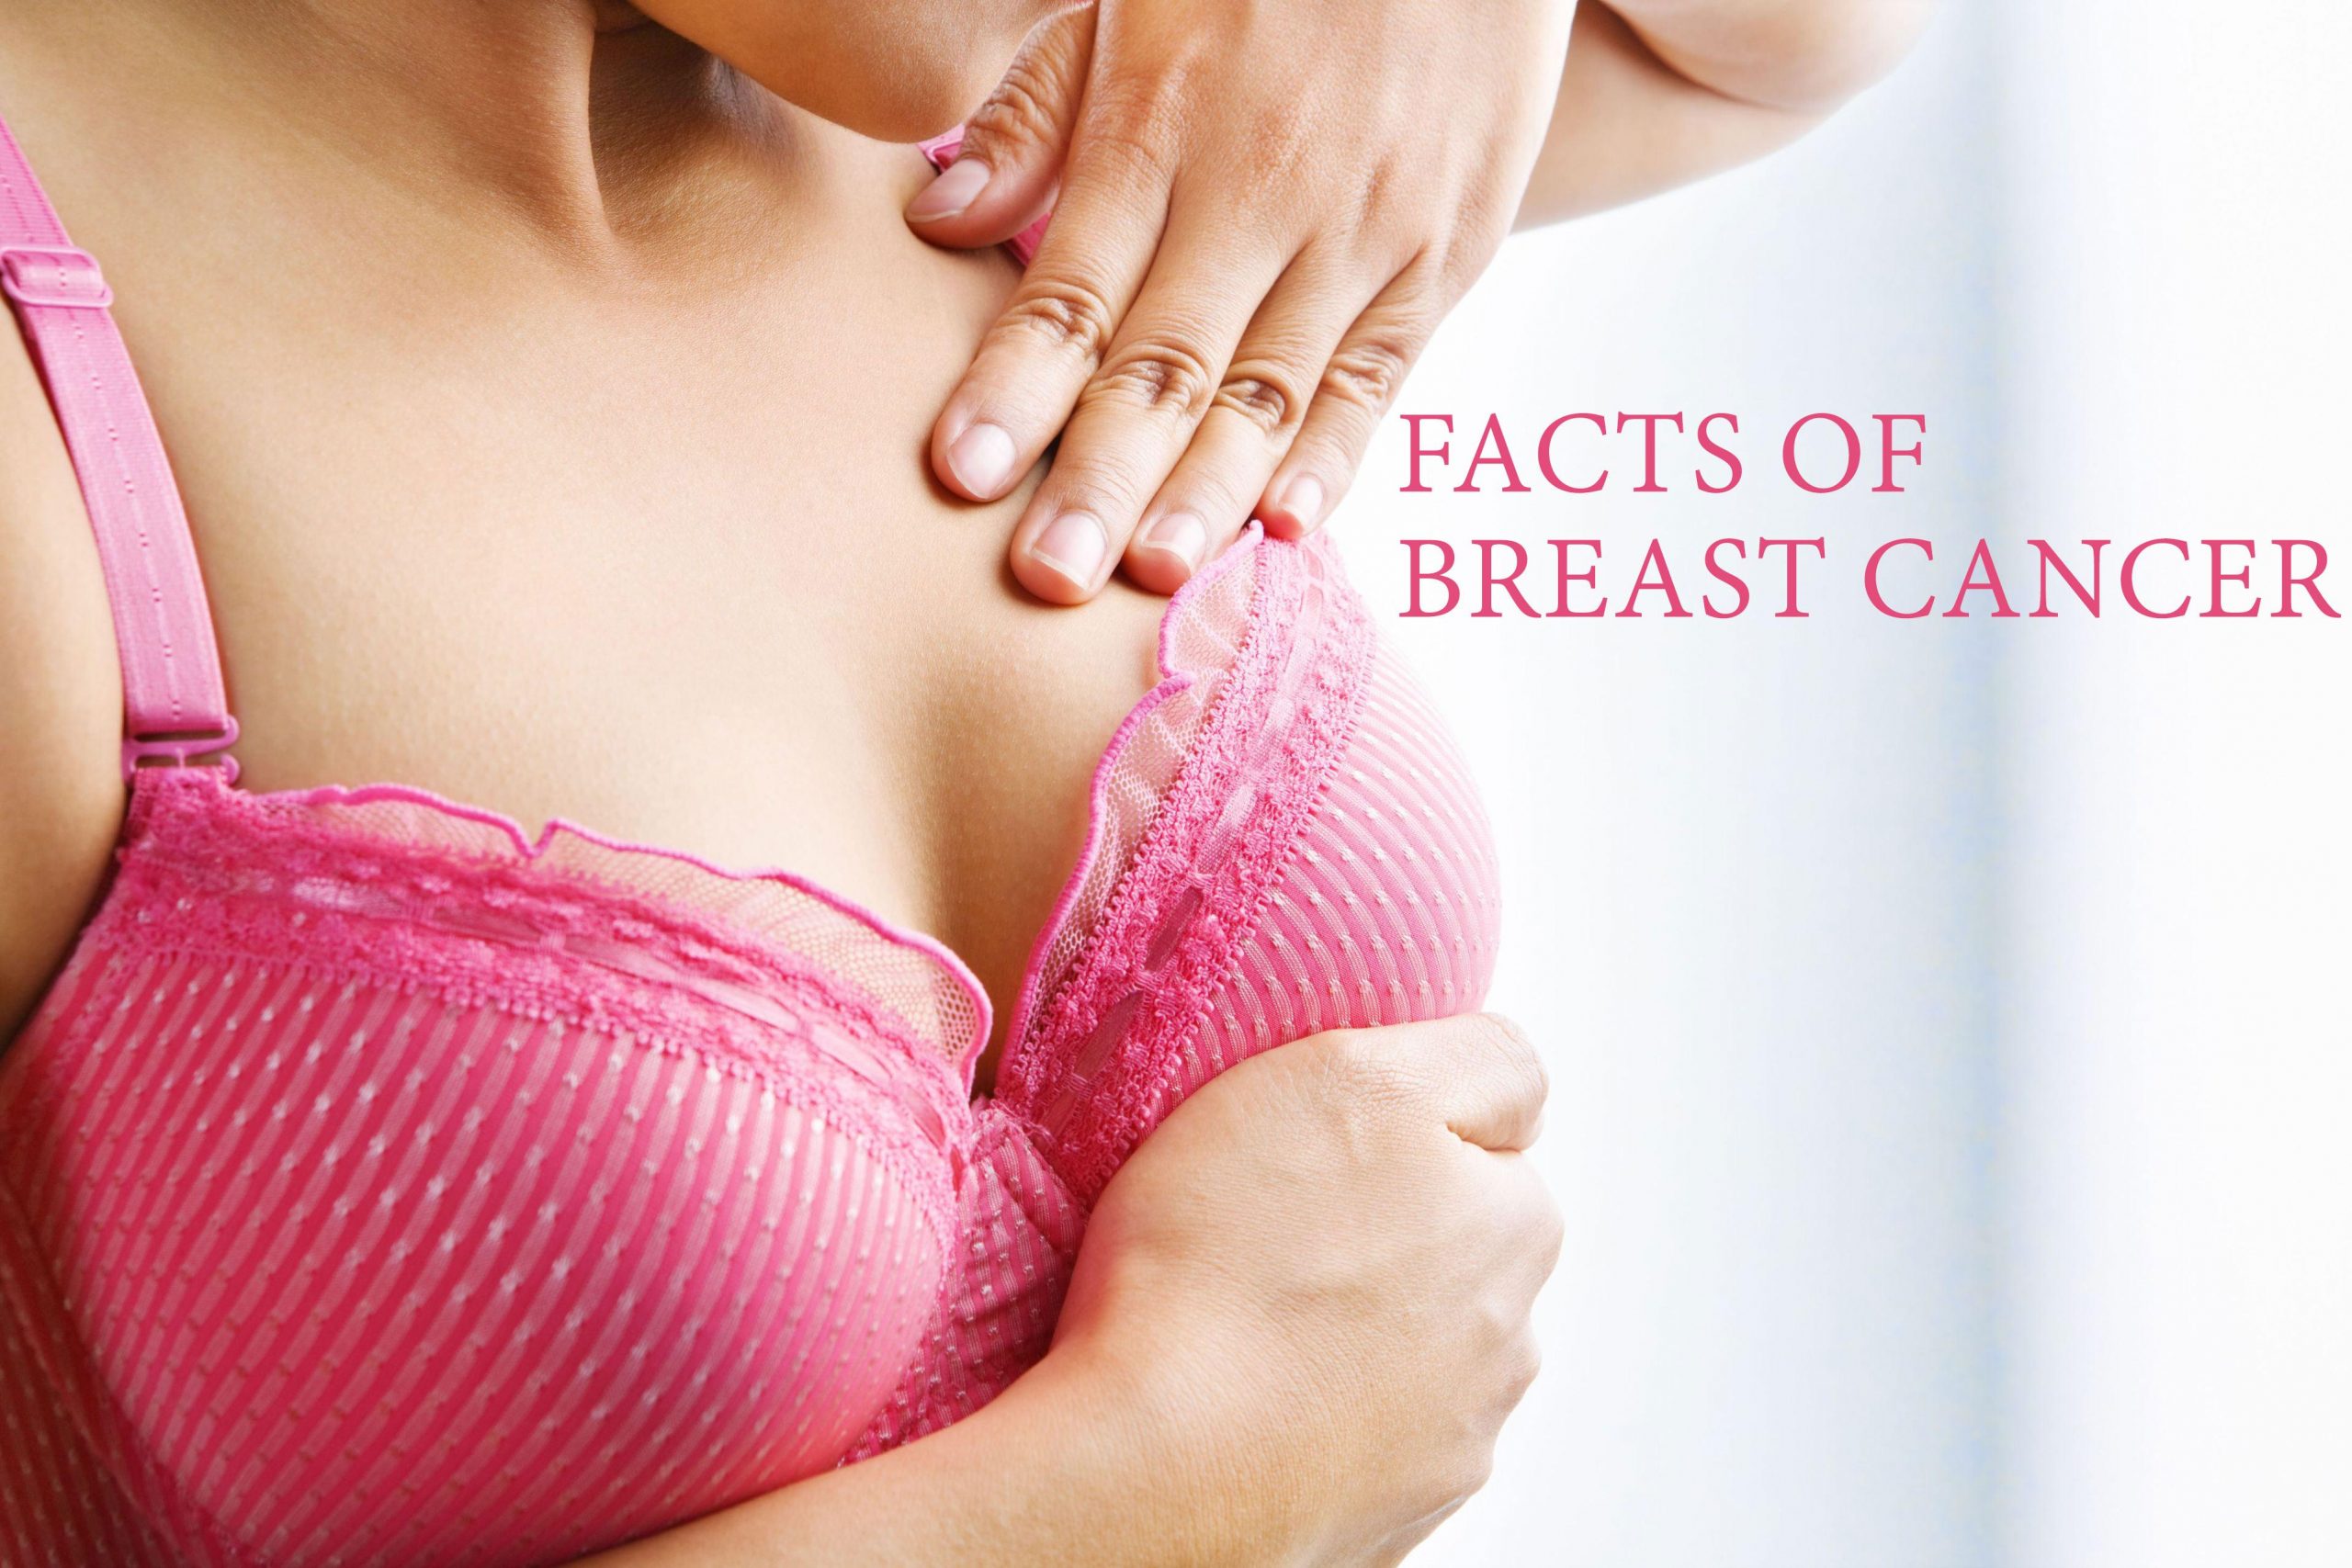 14 Wrong Facts About Breast Cancer You Should Know